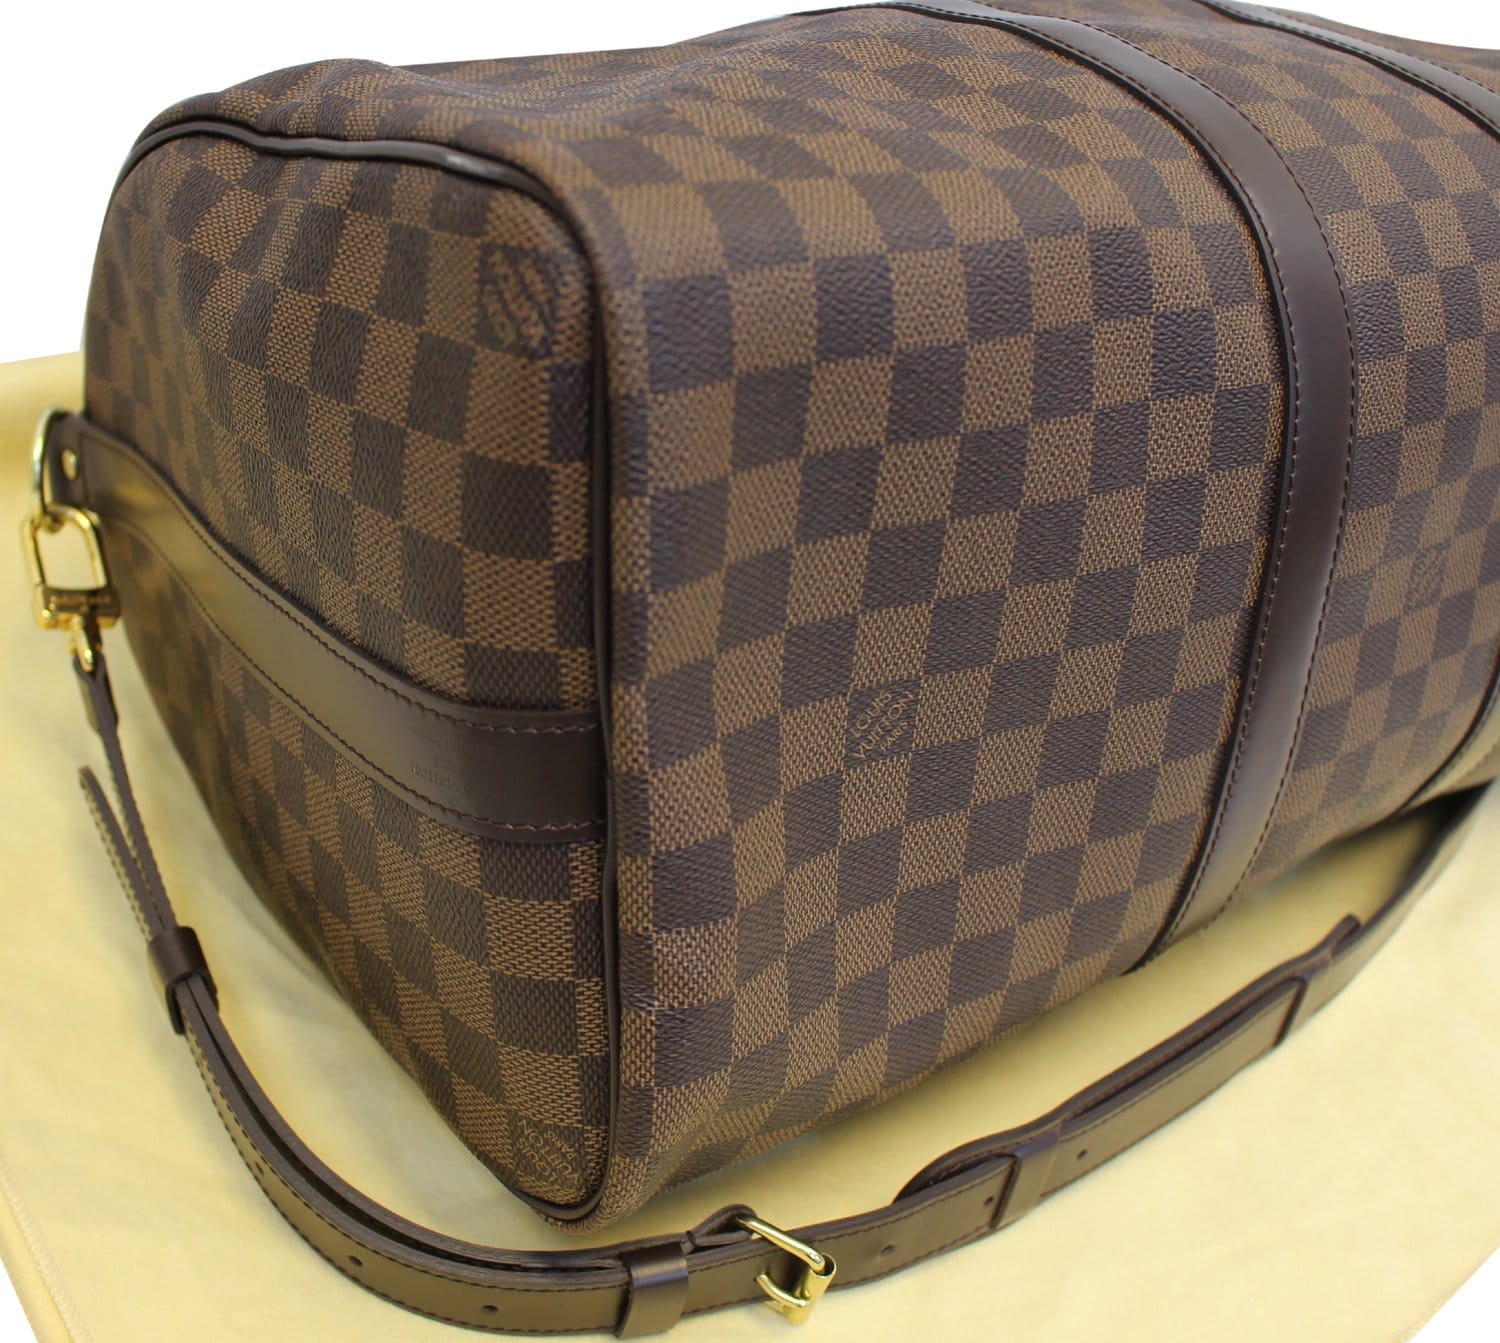 Keepall 45 Bandoulière  Used & Preloved Louis Vuitton Travel Bag